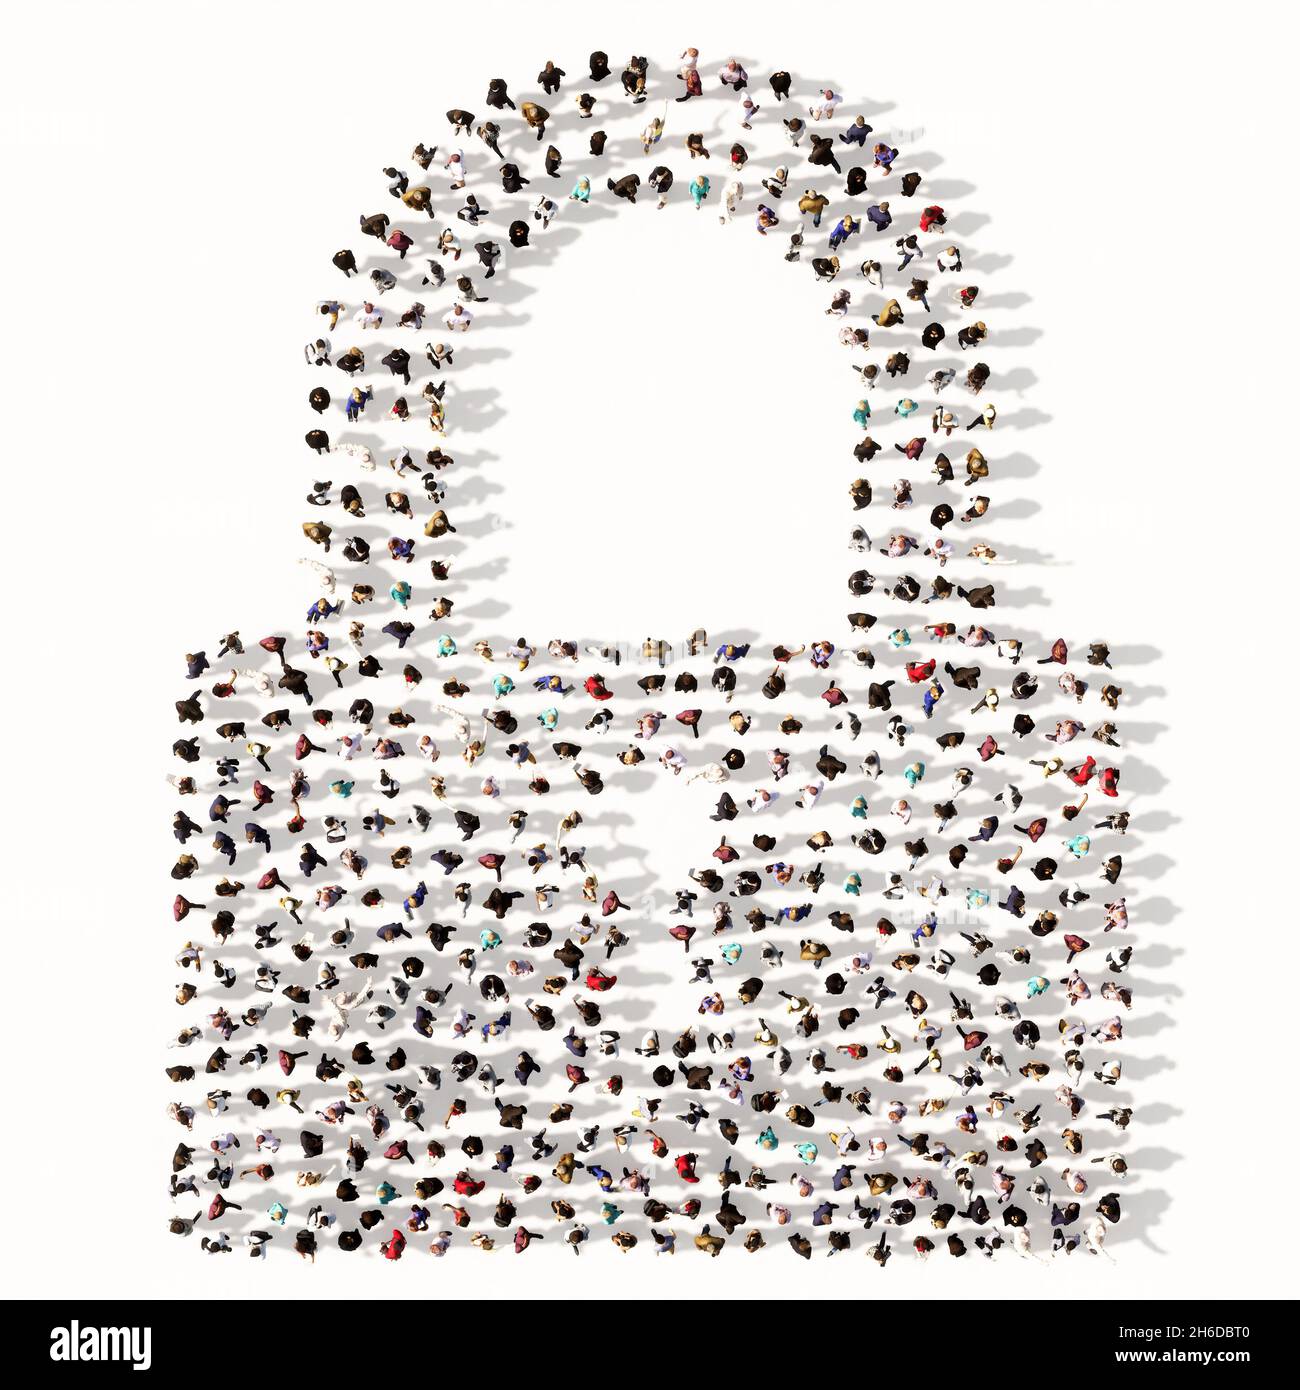 Concept conceptual large community of people forming the padlock icon. 3d illustration metaphor for communication, encryption, security, privacy Stock Photo